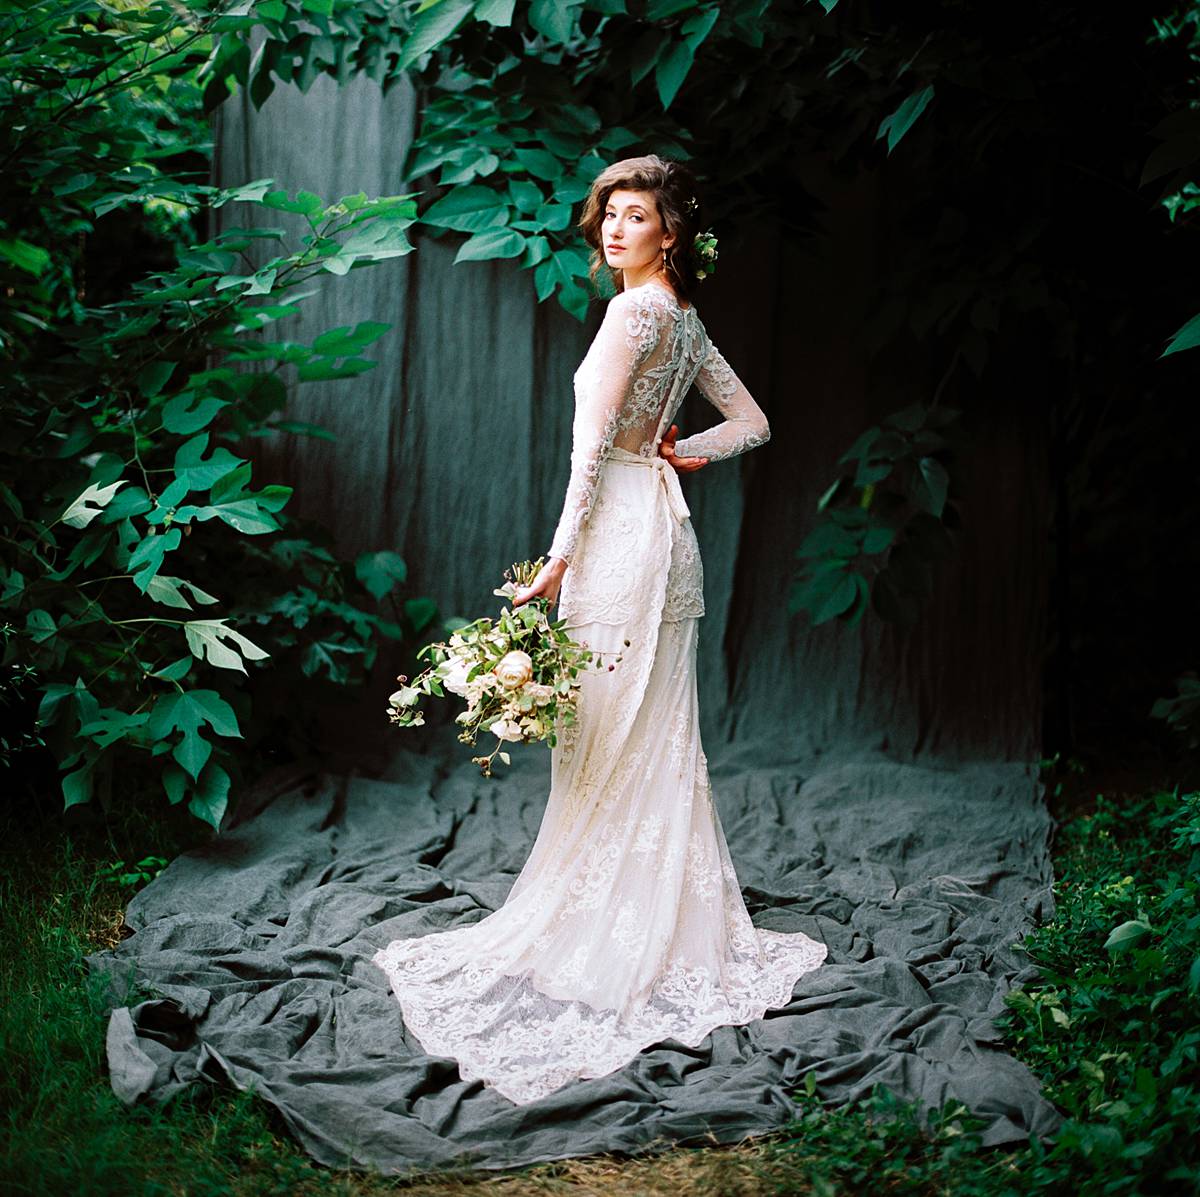 film bridal portrait with lace dress and bouquet in front of savage muslin backdrop outdoors